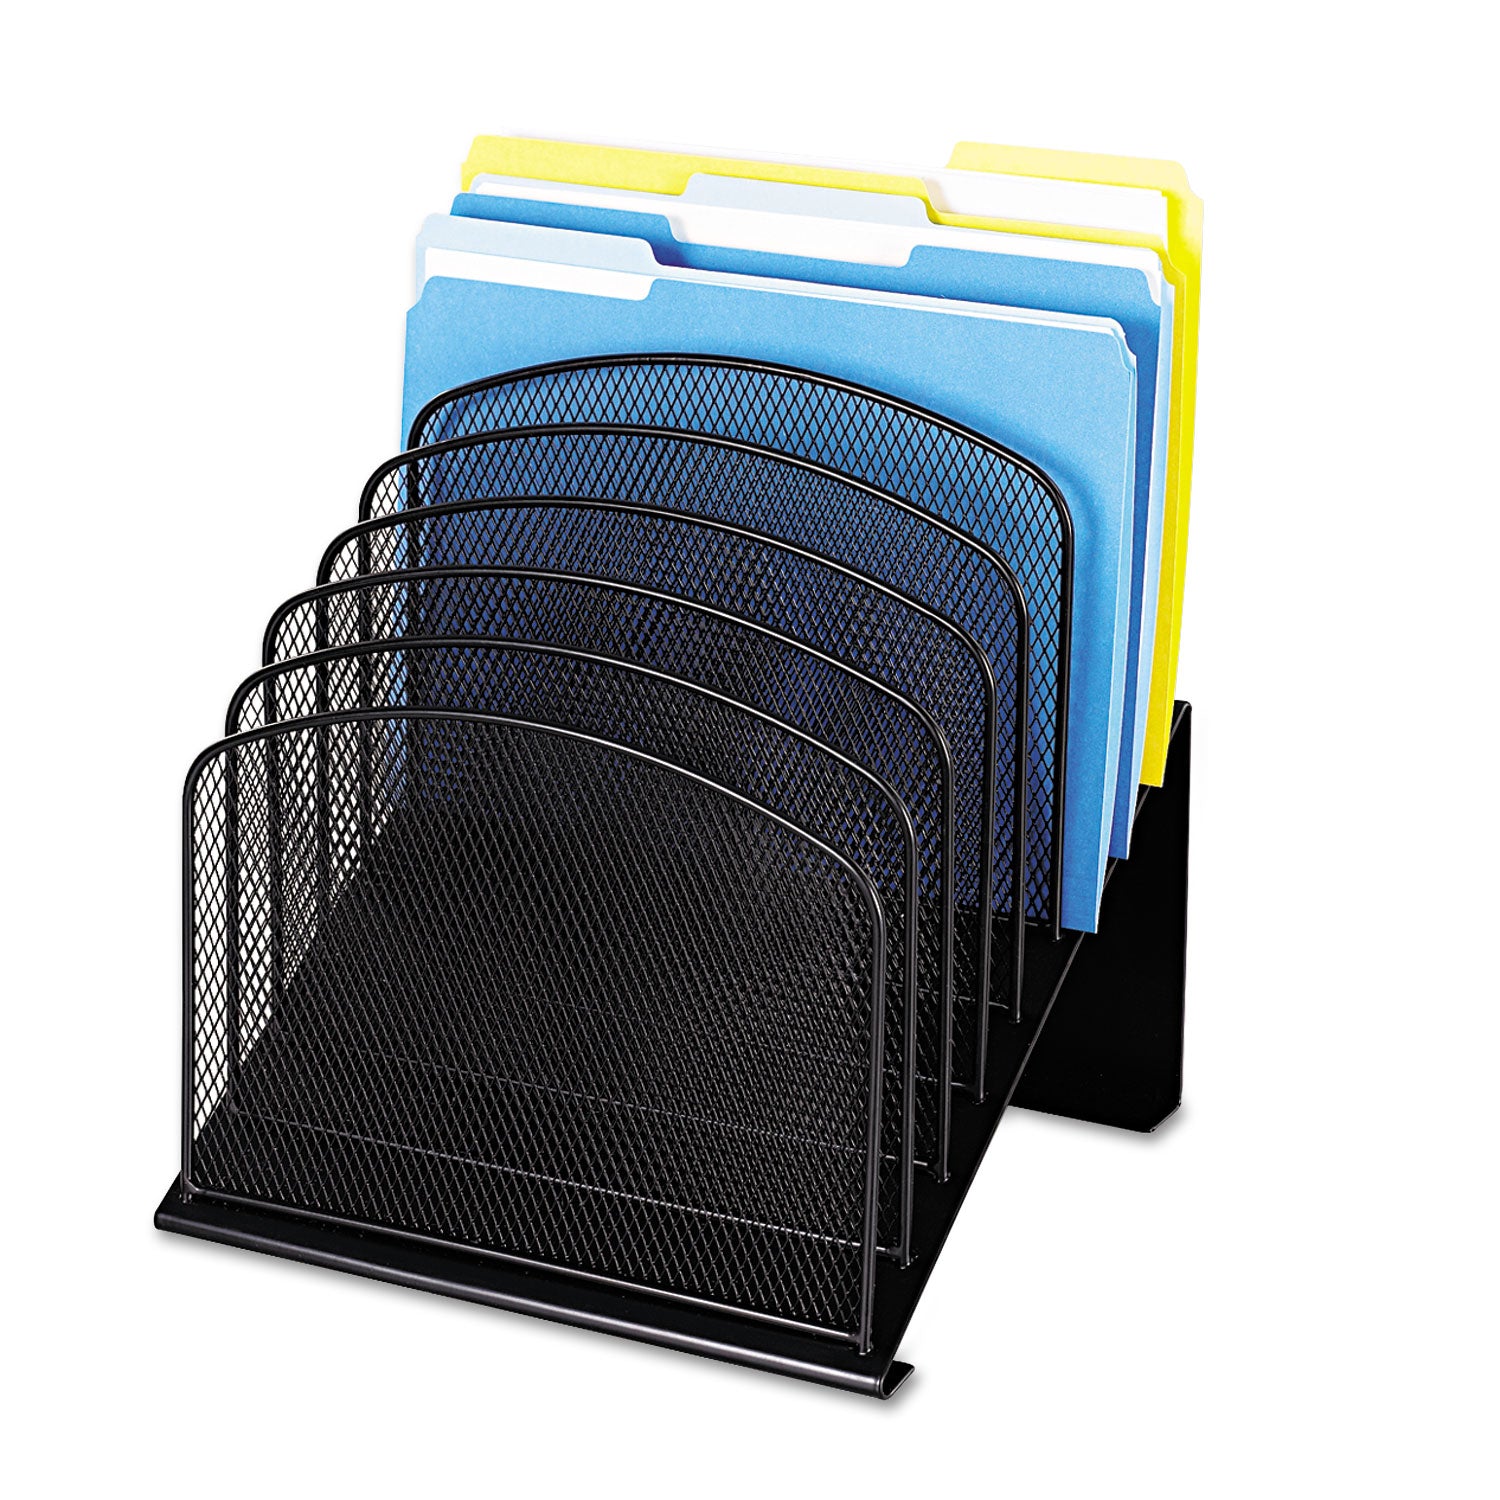 Onyx Mesh Desk Organizer with Tiered Sections, 8 Sections, Letter to Legal Size Files, 11.75" x 10.75" x 14", Black - 